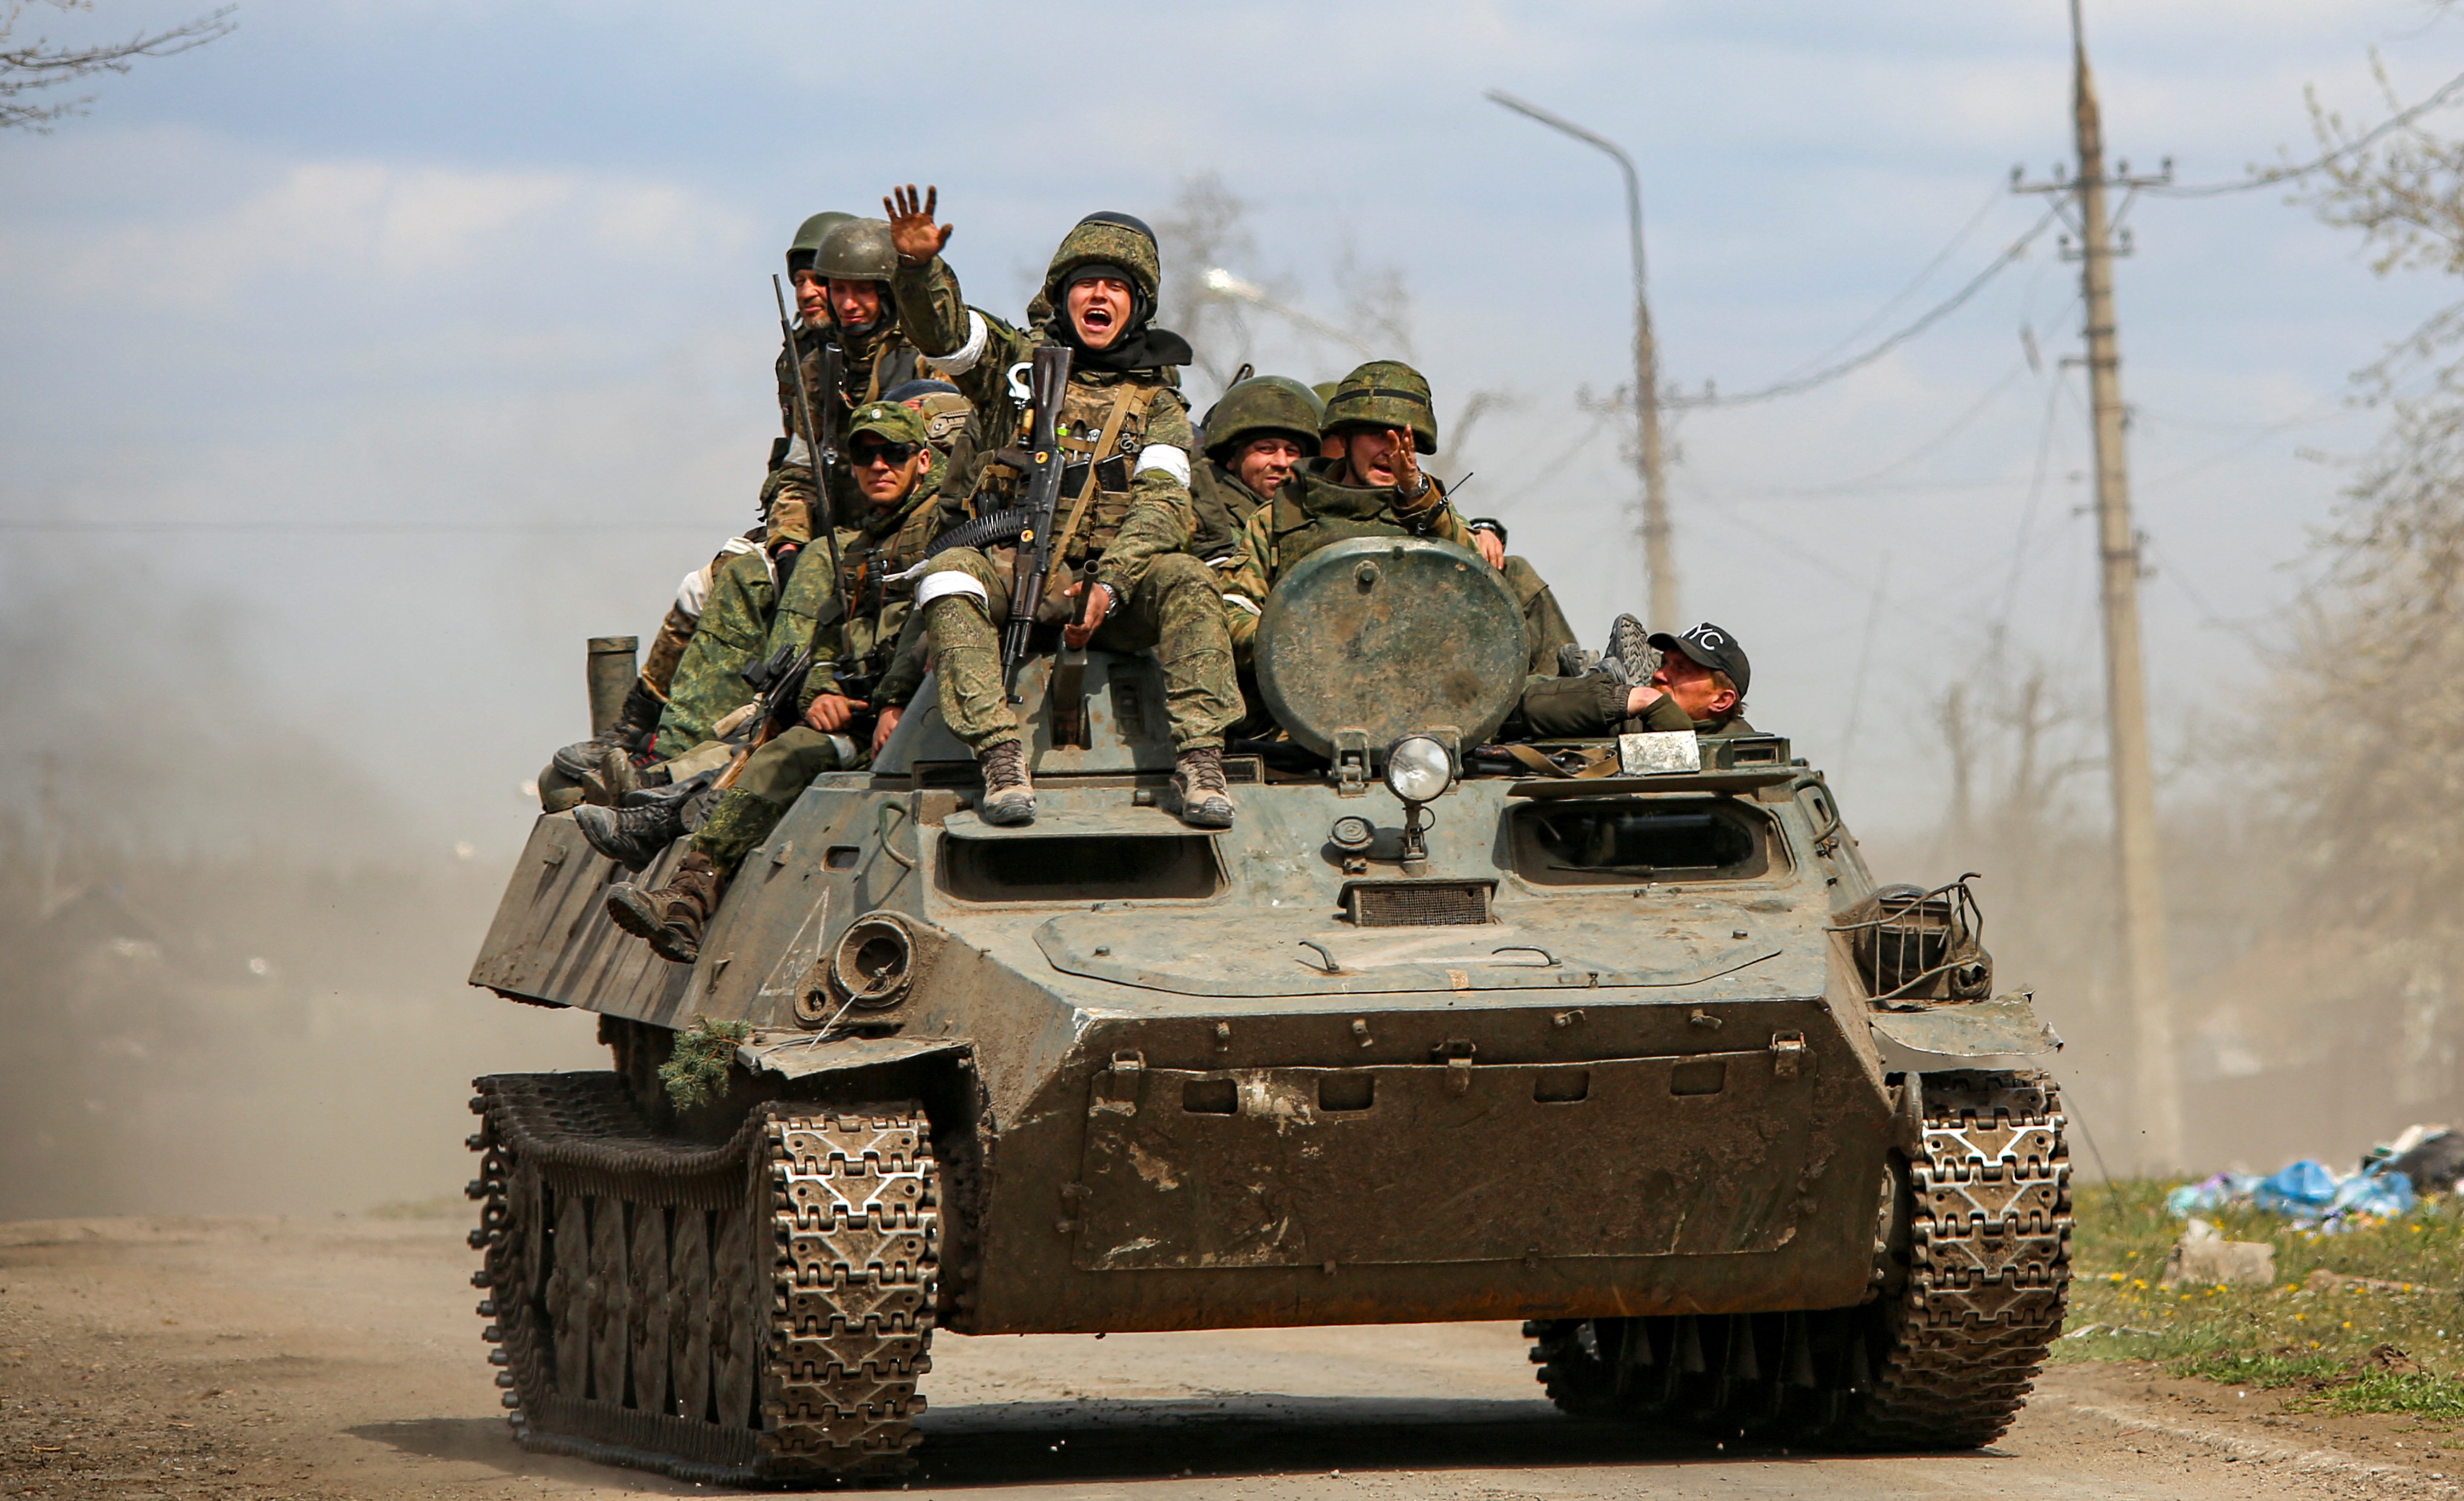 An armoured convoy of pro-Russian troops moves along a road in Mariupol